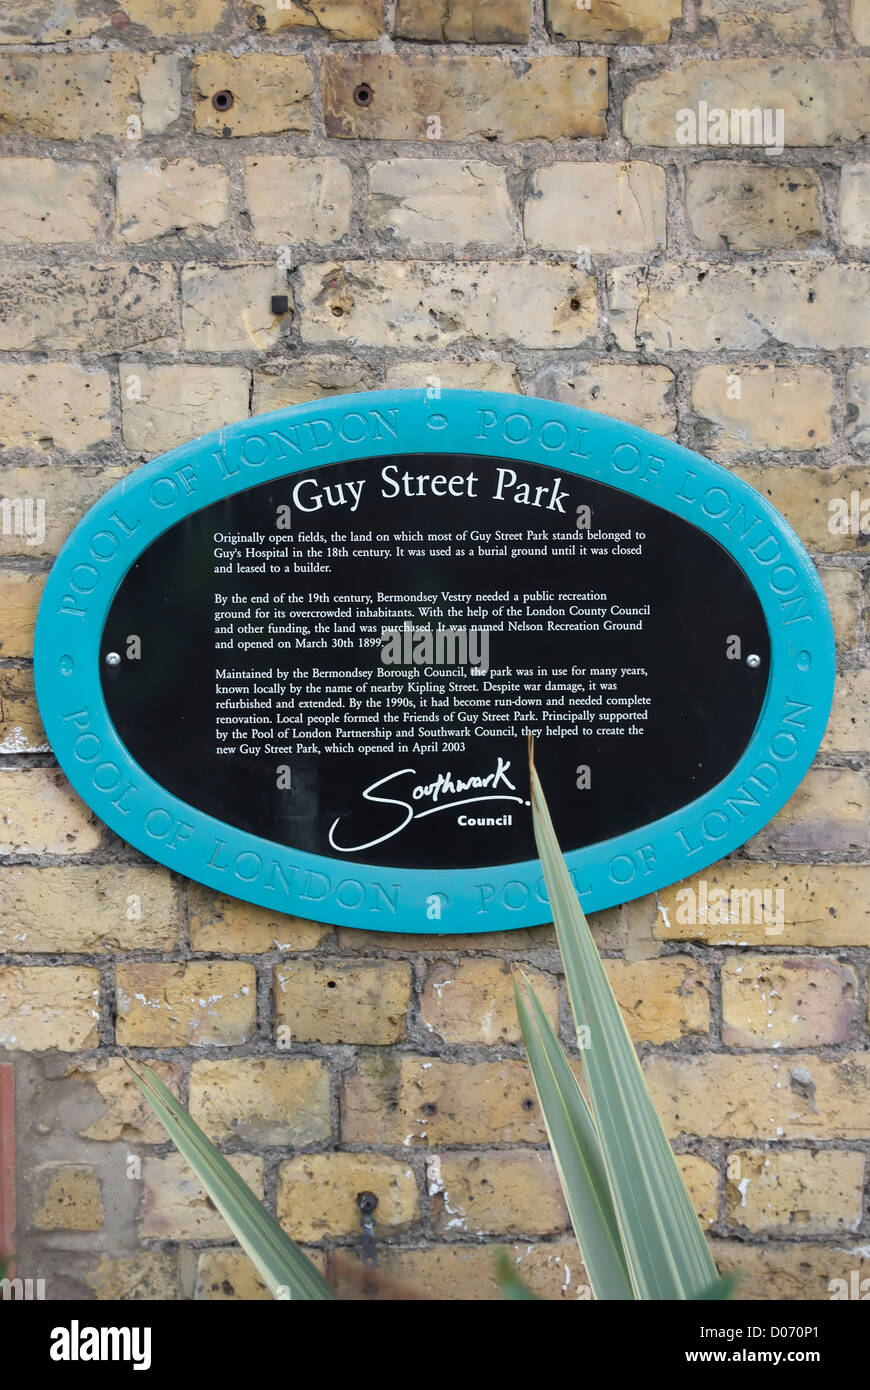 plaque at guy street park, southwark, london, england, describing the history of the park and its restoration Stock Photo